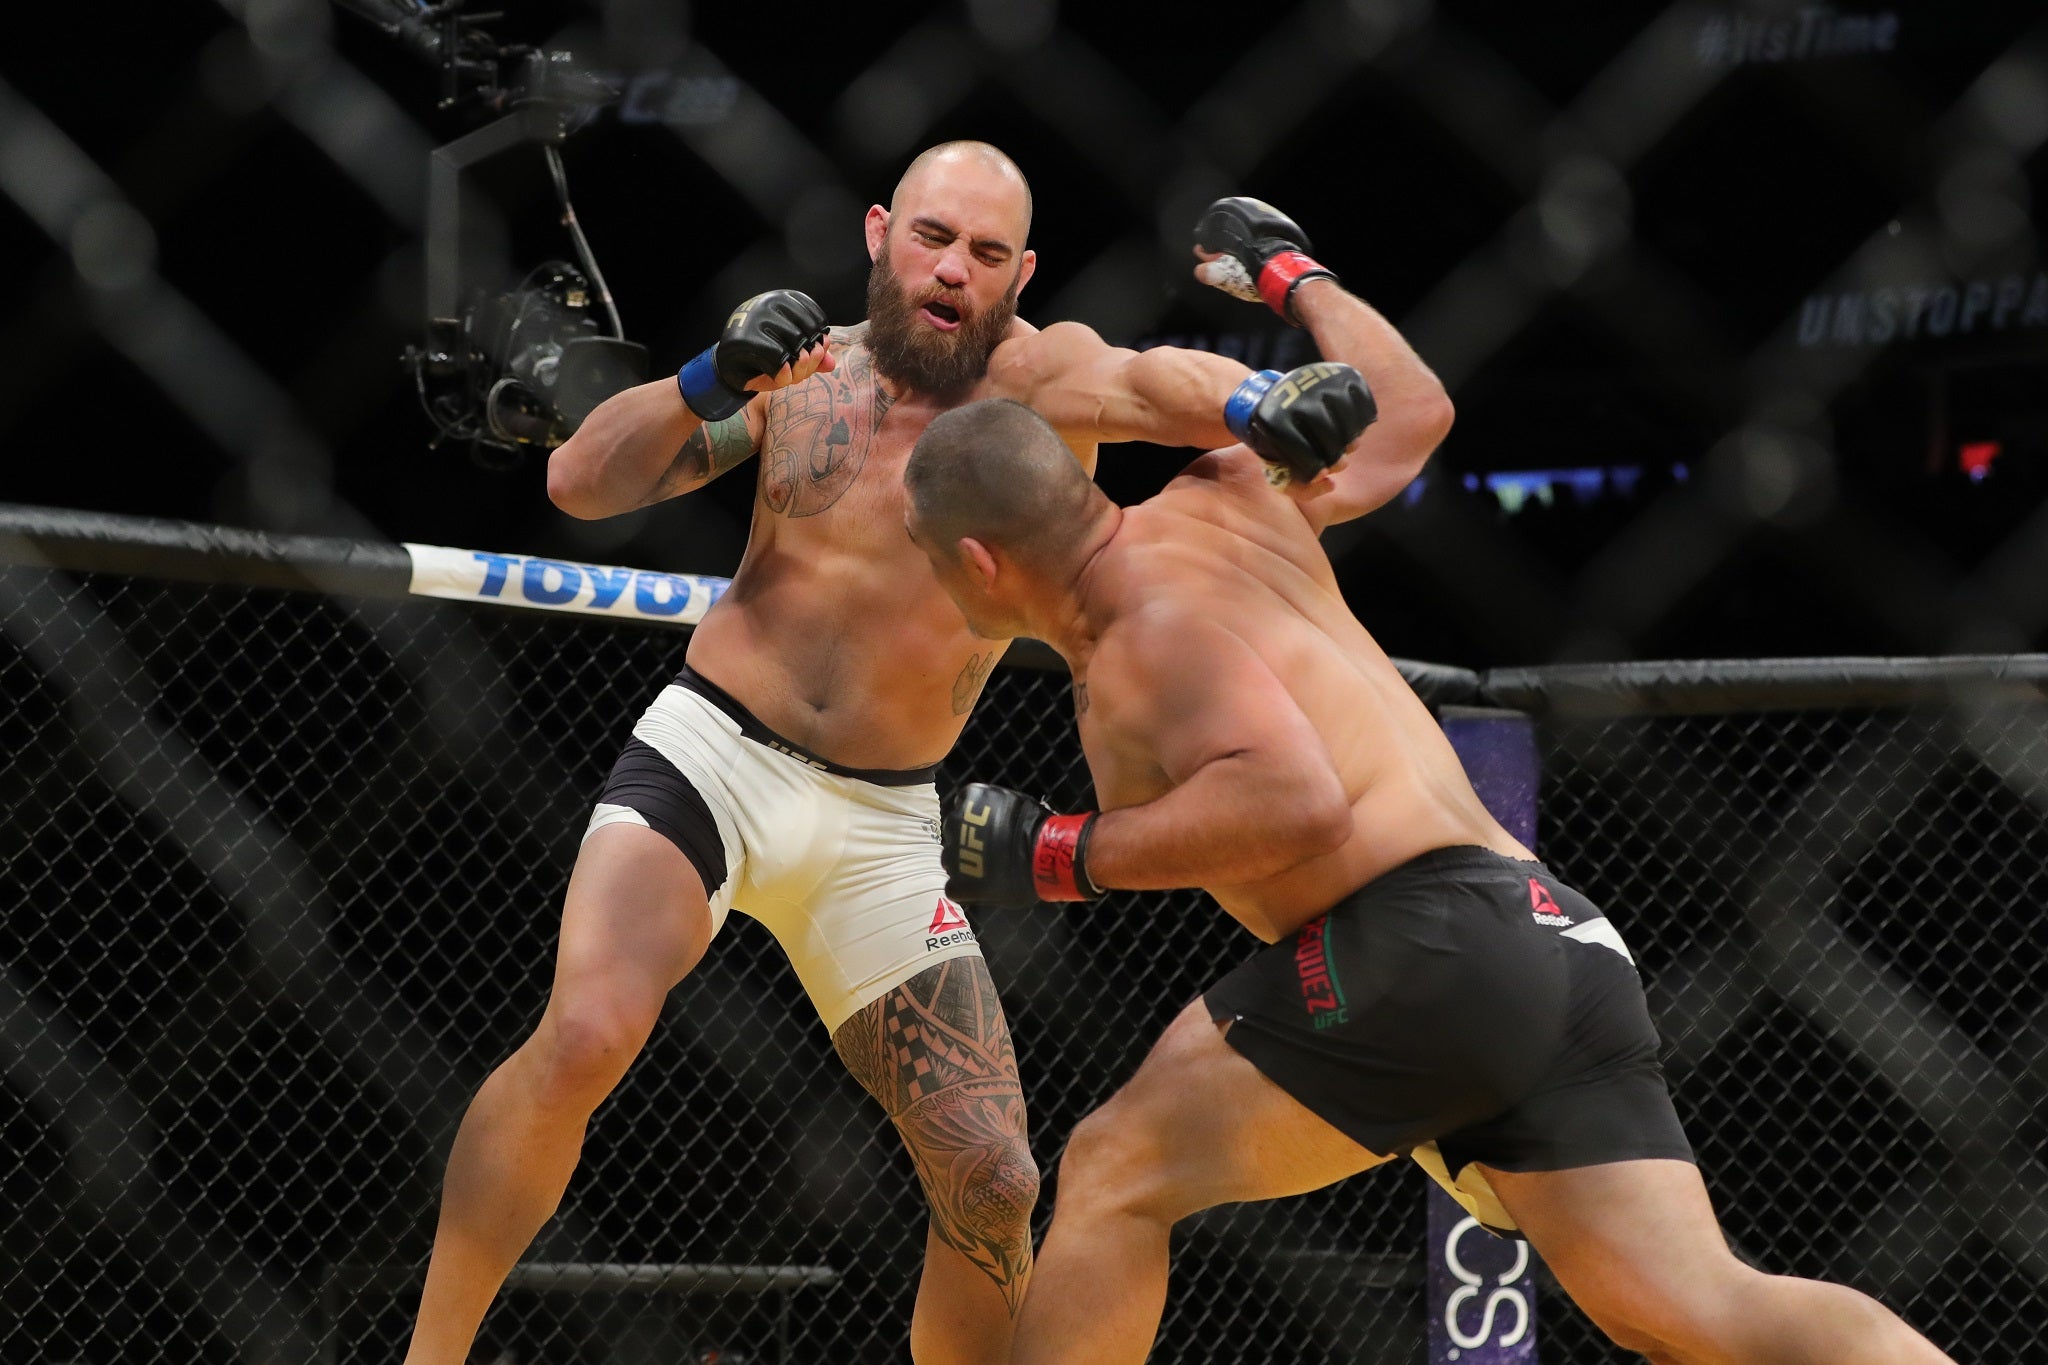 Cain Velazquez throws the punch that led to Travis Browne's stoppage